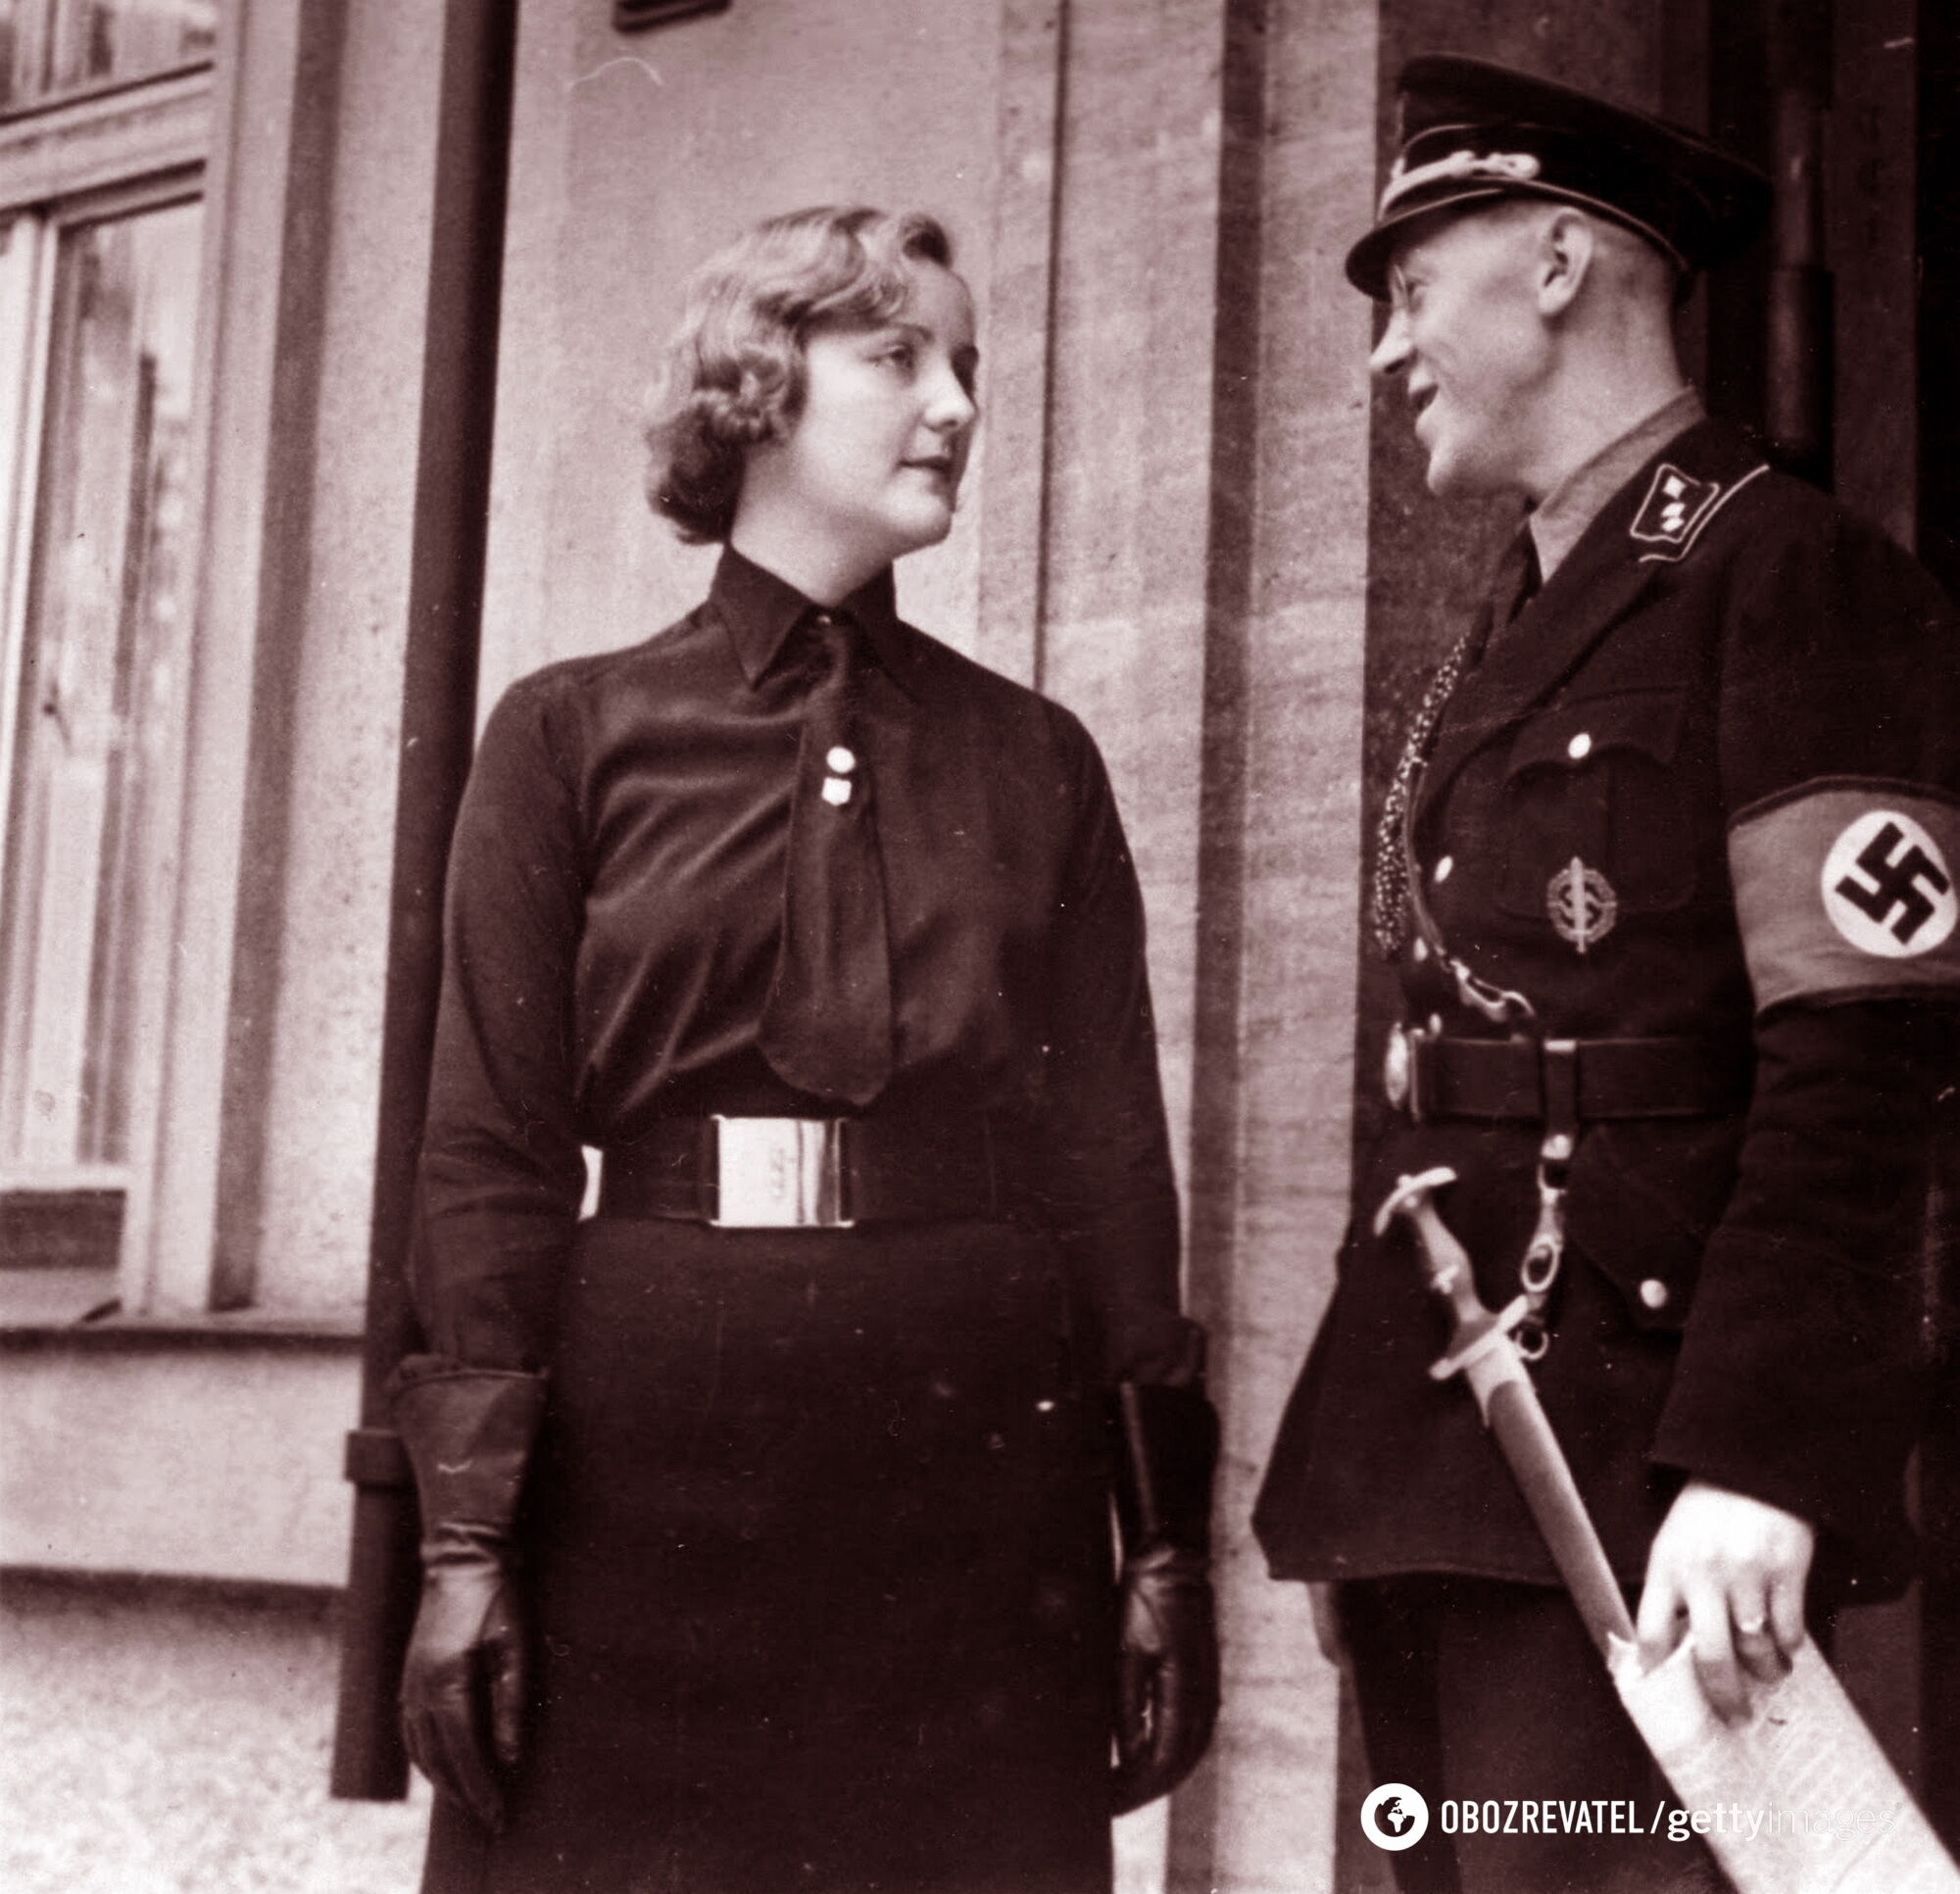 Love is blind. What Hitler's women were like and why they all committed suicide